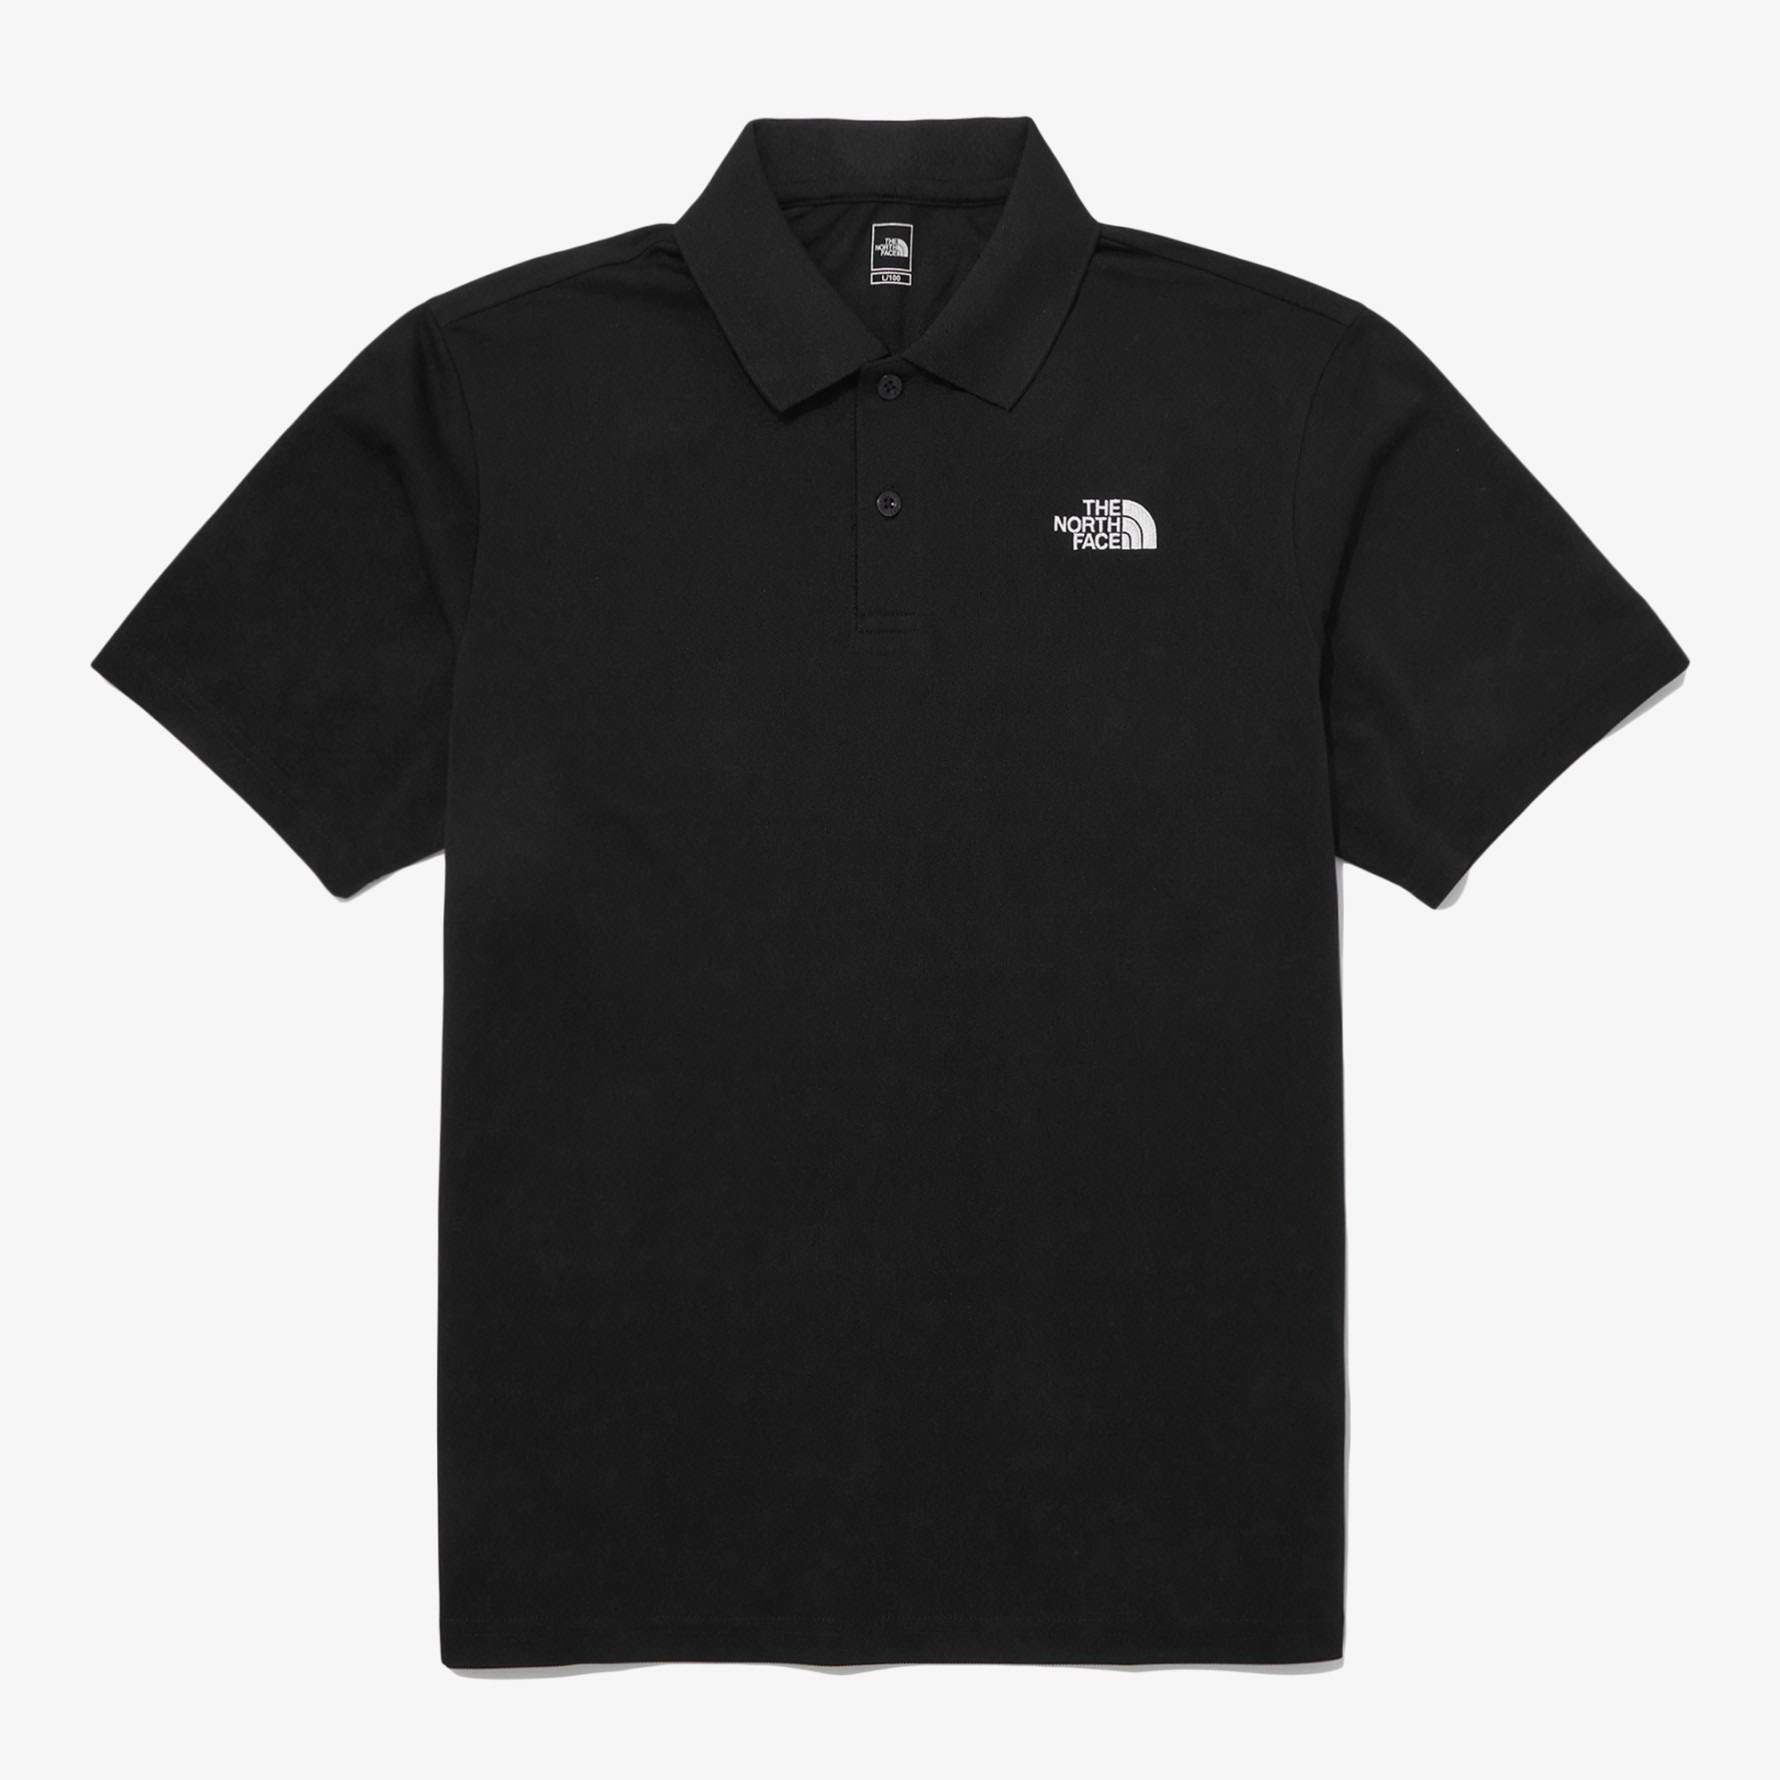 THE NORTH FACE ポロシャツ M&apos;S CMX PRIME S/S POLO クールマック...